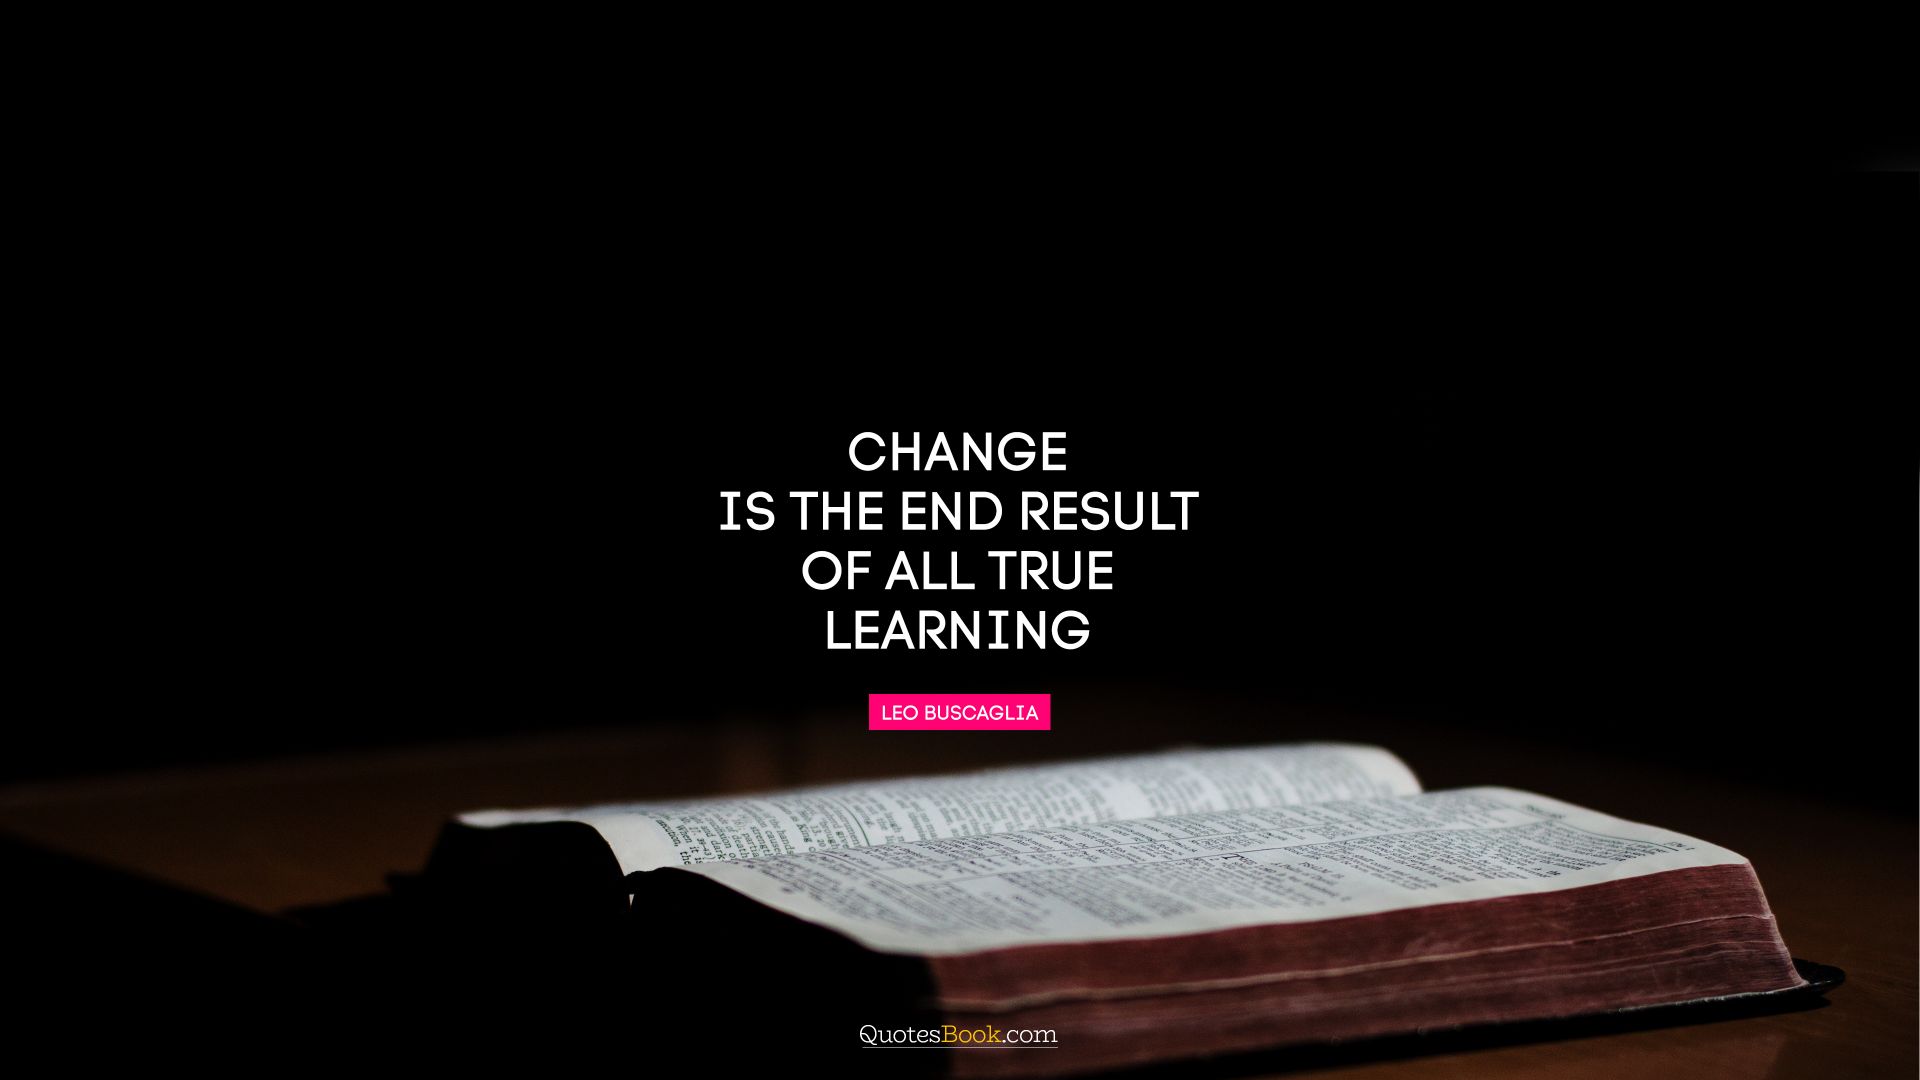 Change is the end result of all true learning. - Quote by Leo Buscaglia